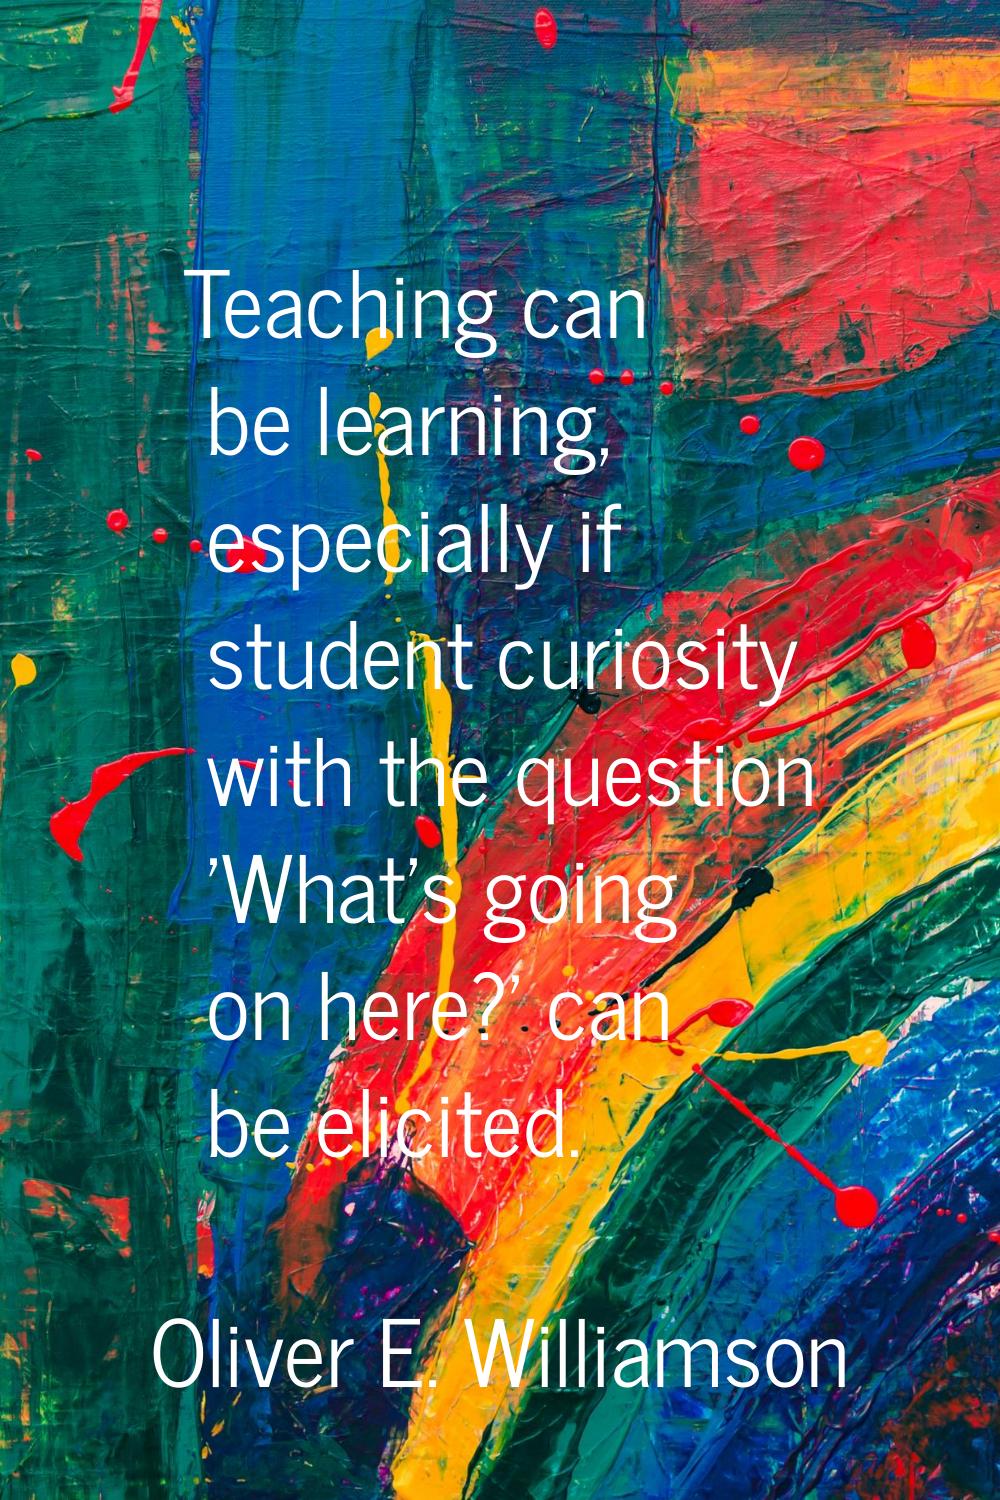 Teaching can be learning, especially if student curiosity with the question 'What's going on here?'